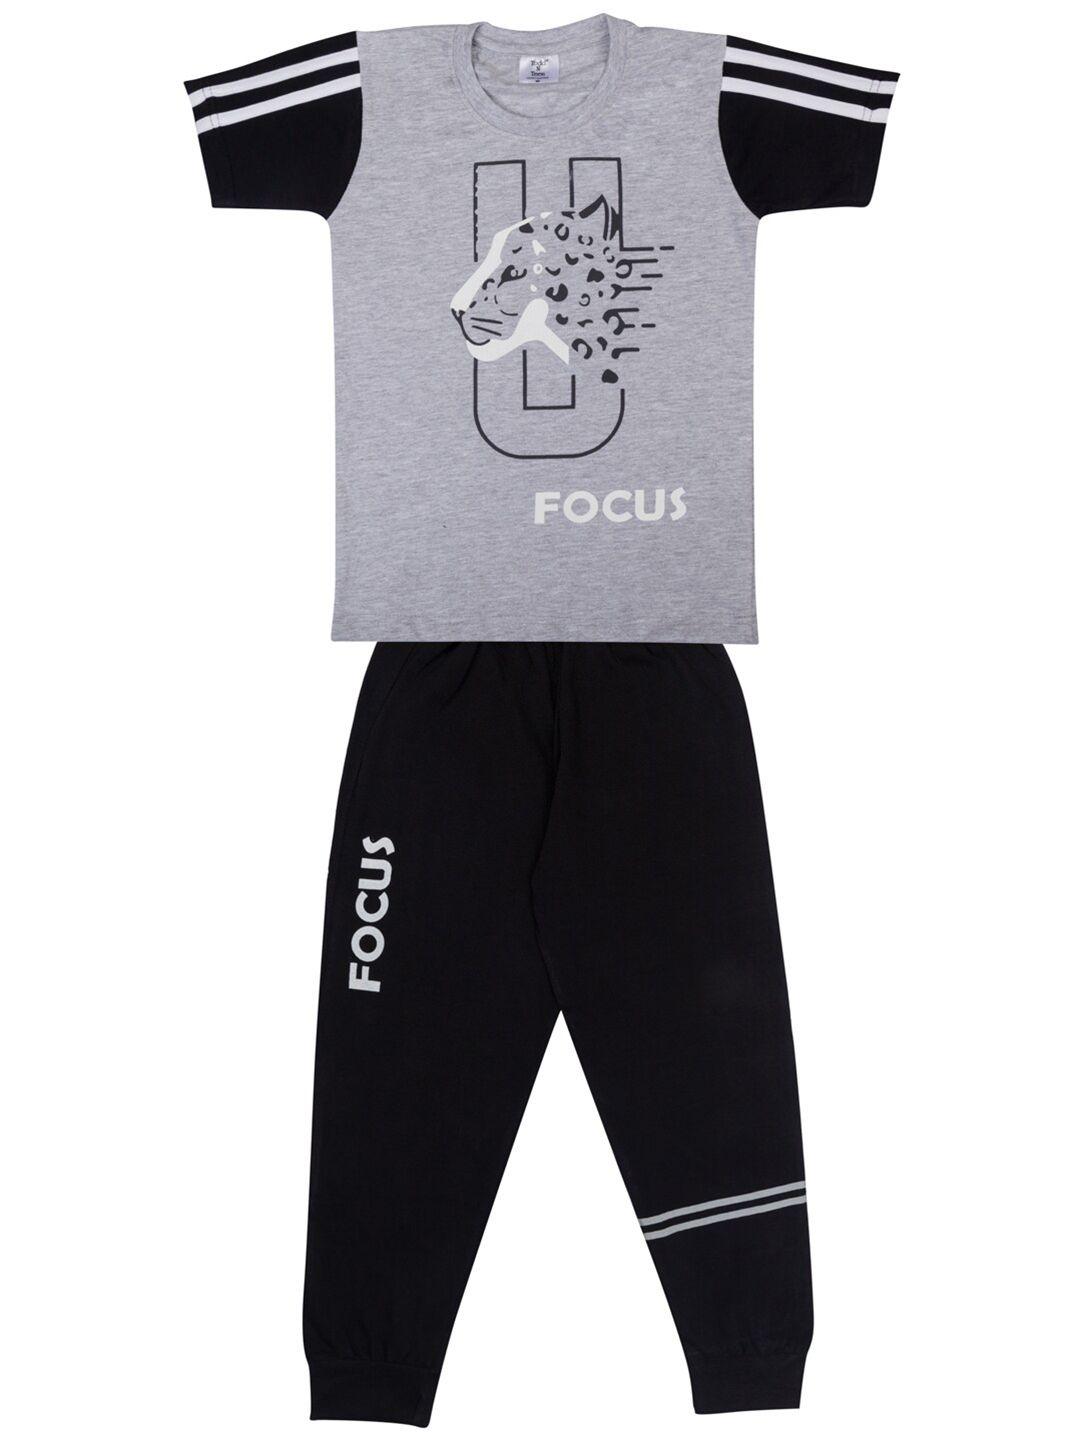 todd-n-teen-boys-grey-&-black-printed-pure-cotton-t-shirt-with-trousers